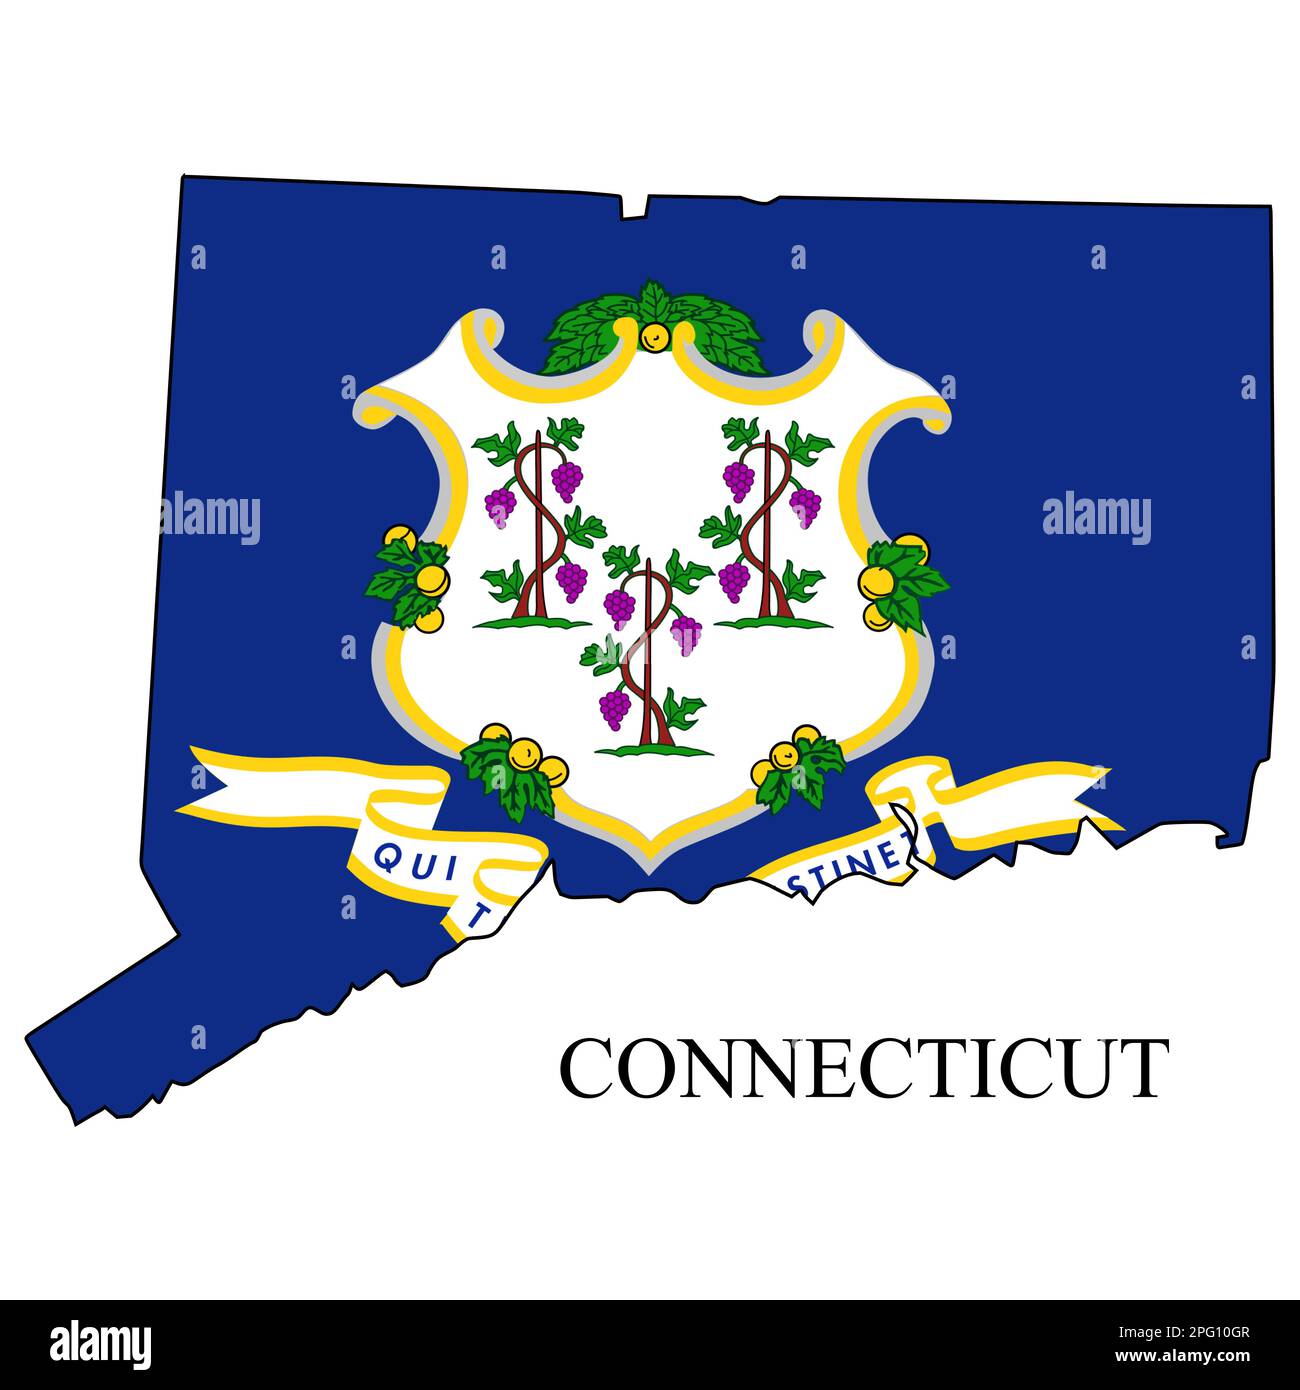 Connecticut map vector illustration. Global economy. State in America. North America. United States. America. U.S.A Stock Vector